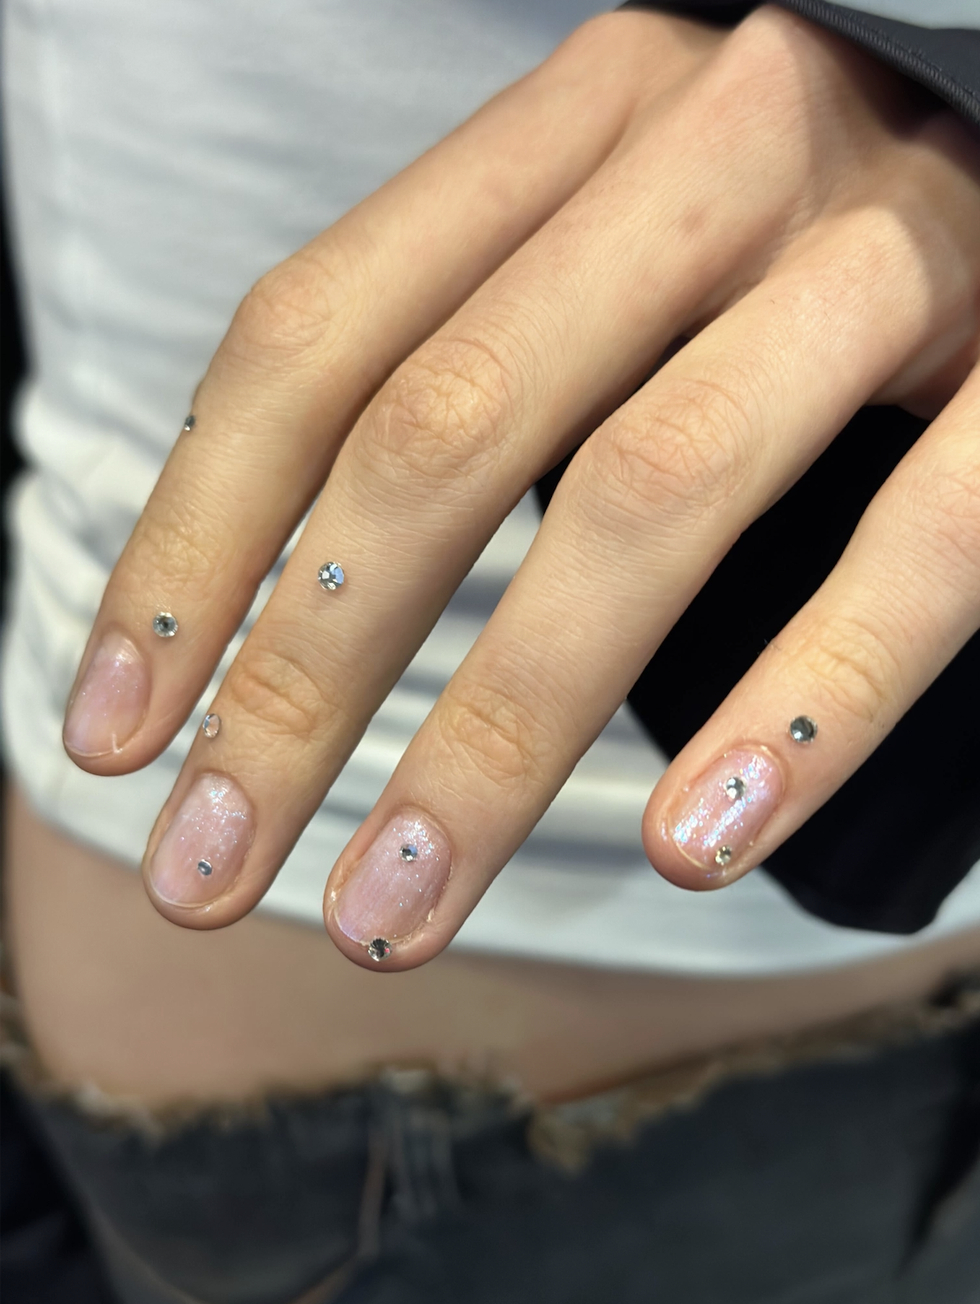 Manicure trends that will dominate this spring and summer. 10 ideas for inspiration from minimalism to luxurious classics